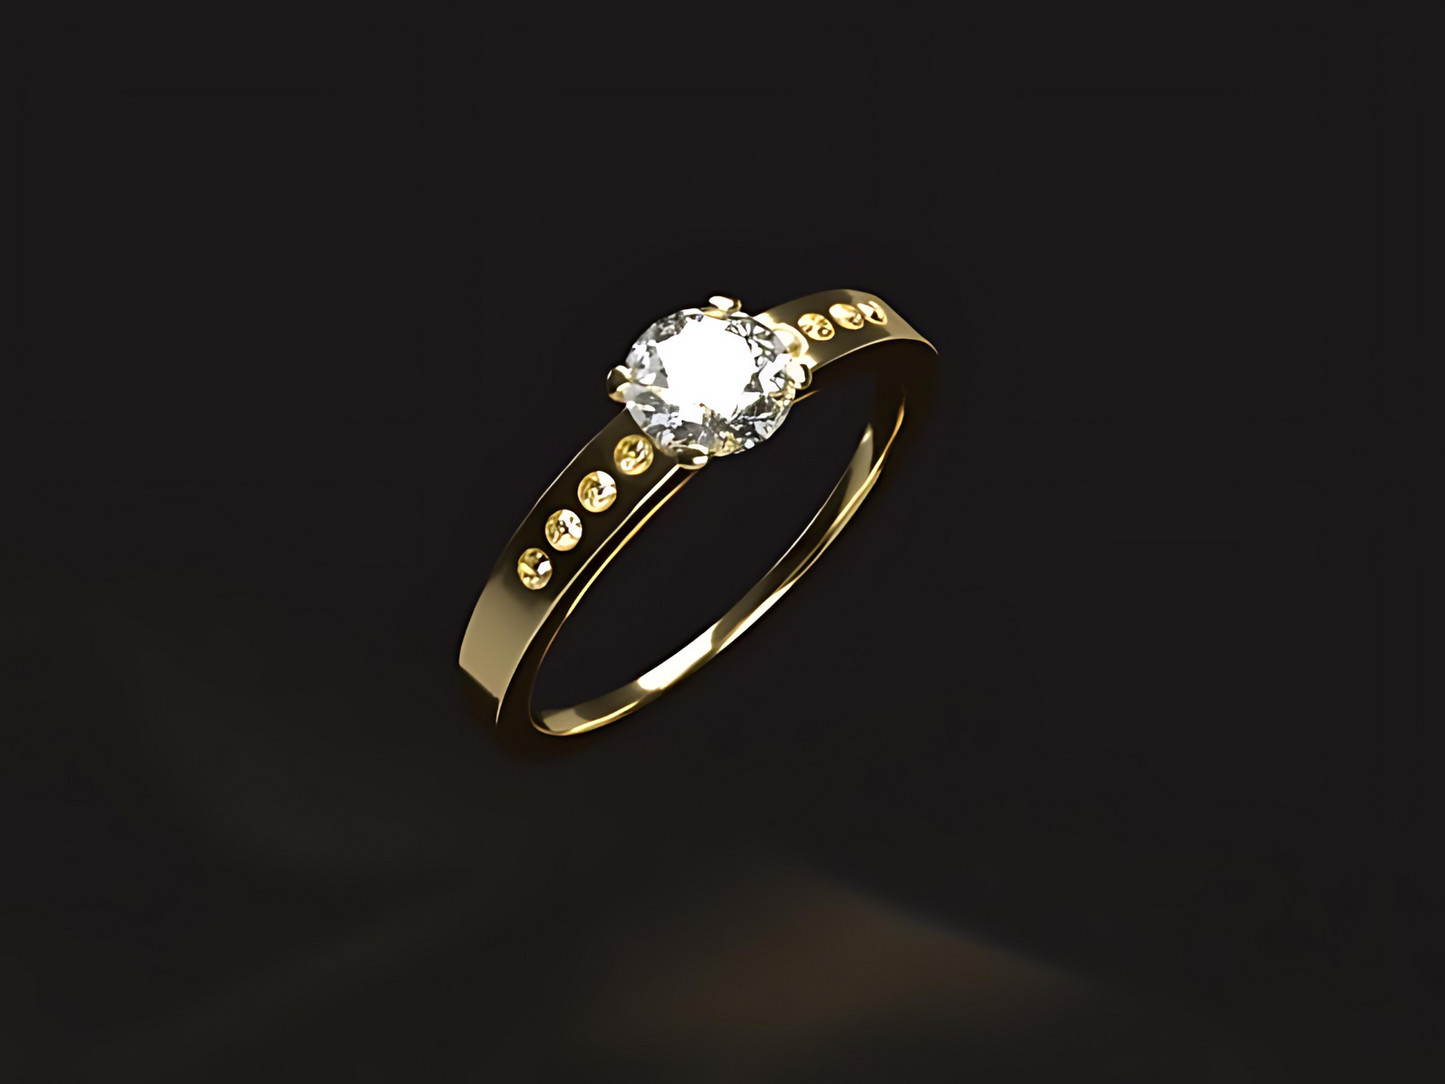 Handmade gold ring with natural 0.66 ct. Vs high quality Diamonds.